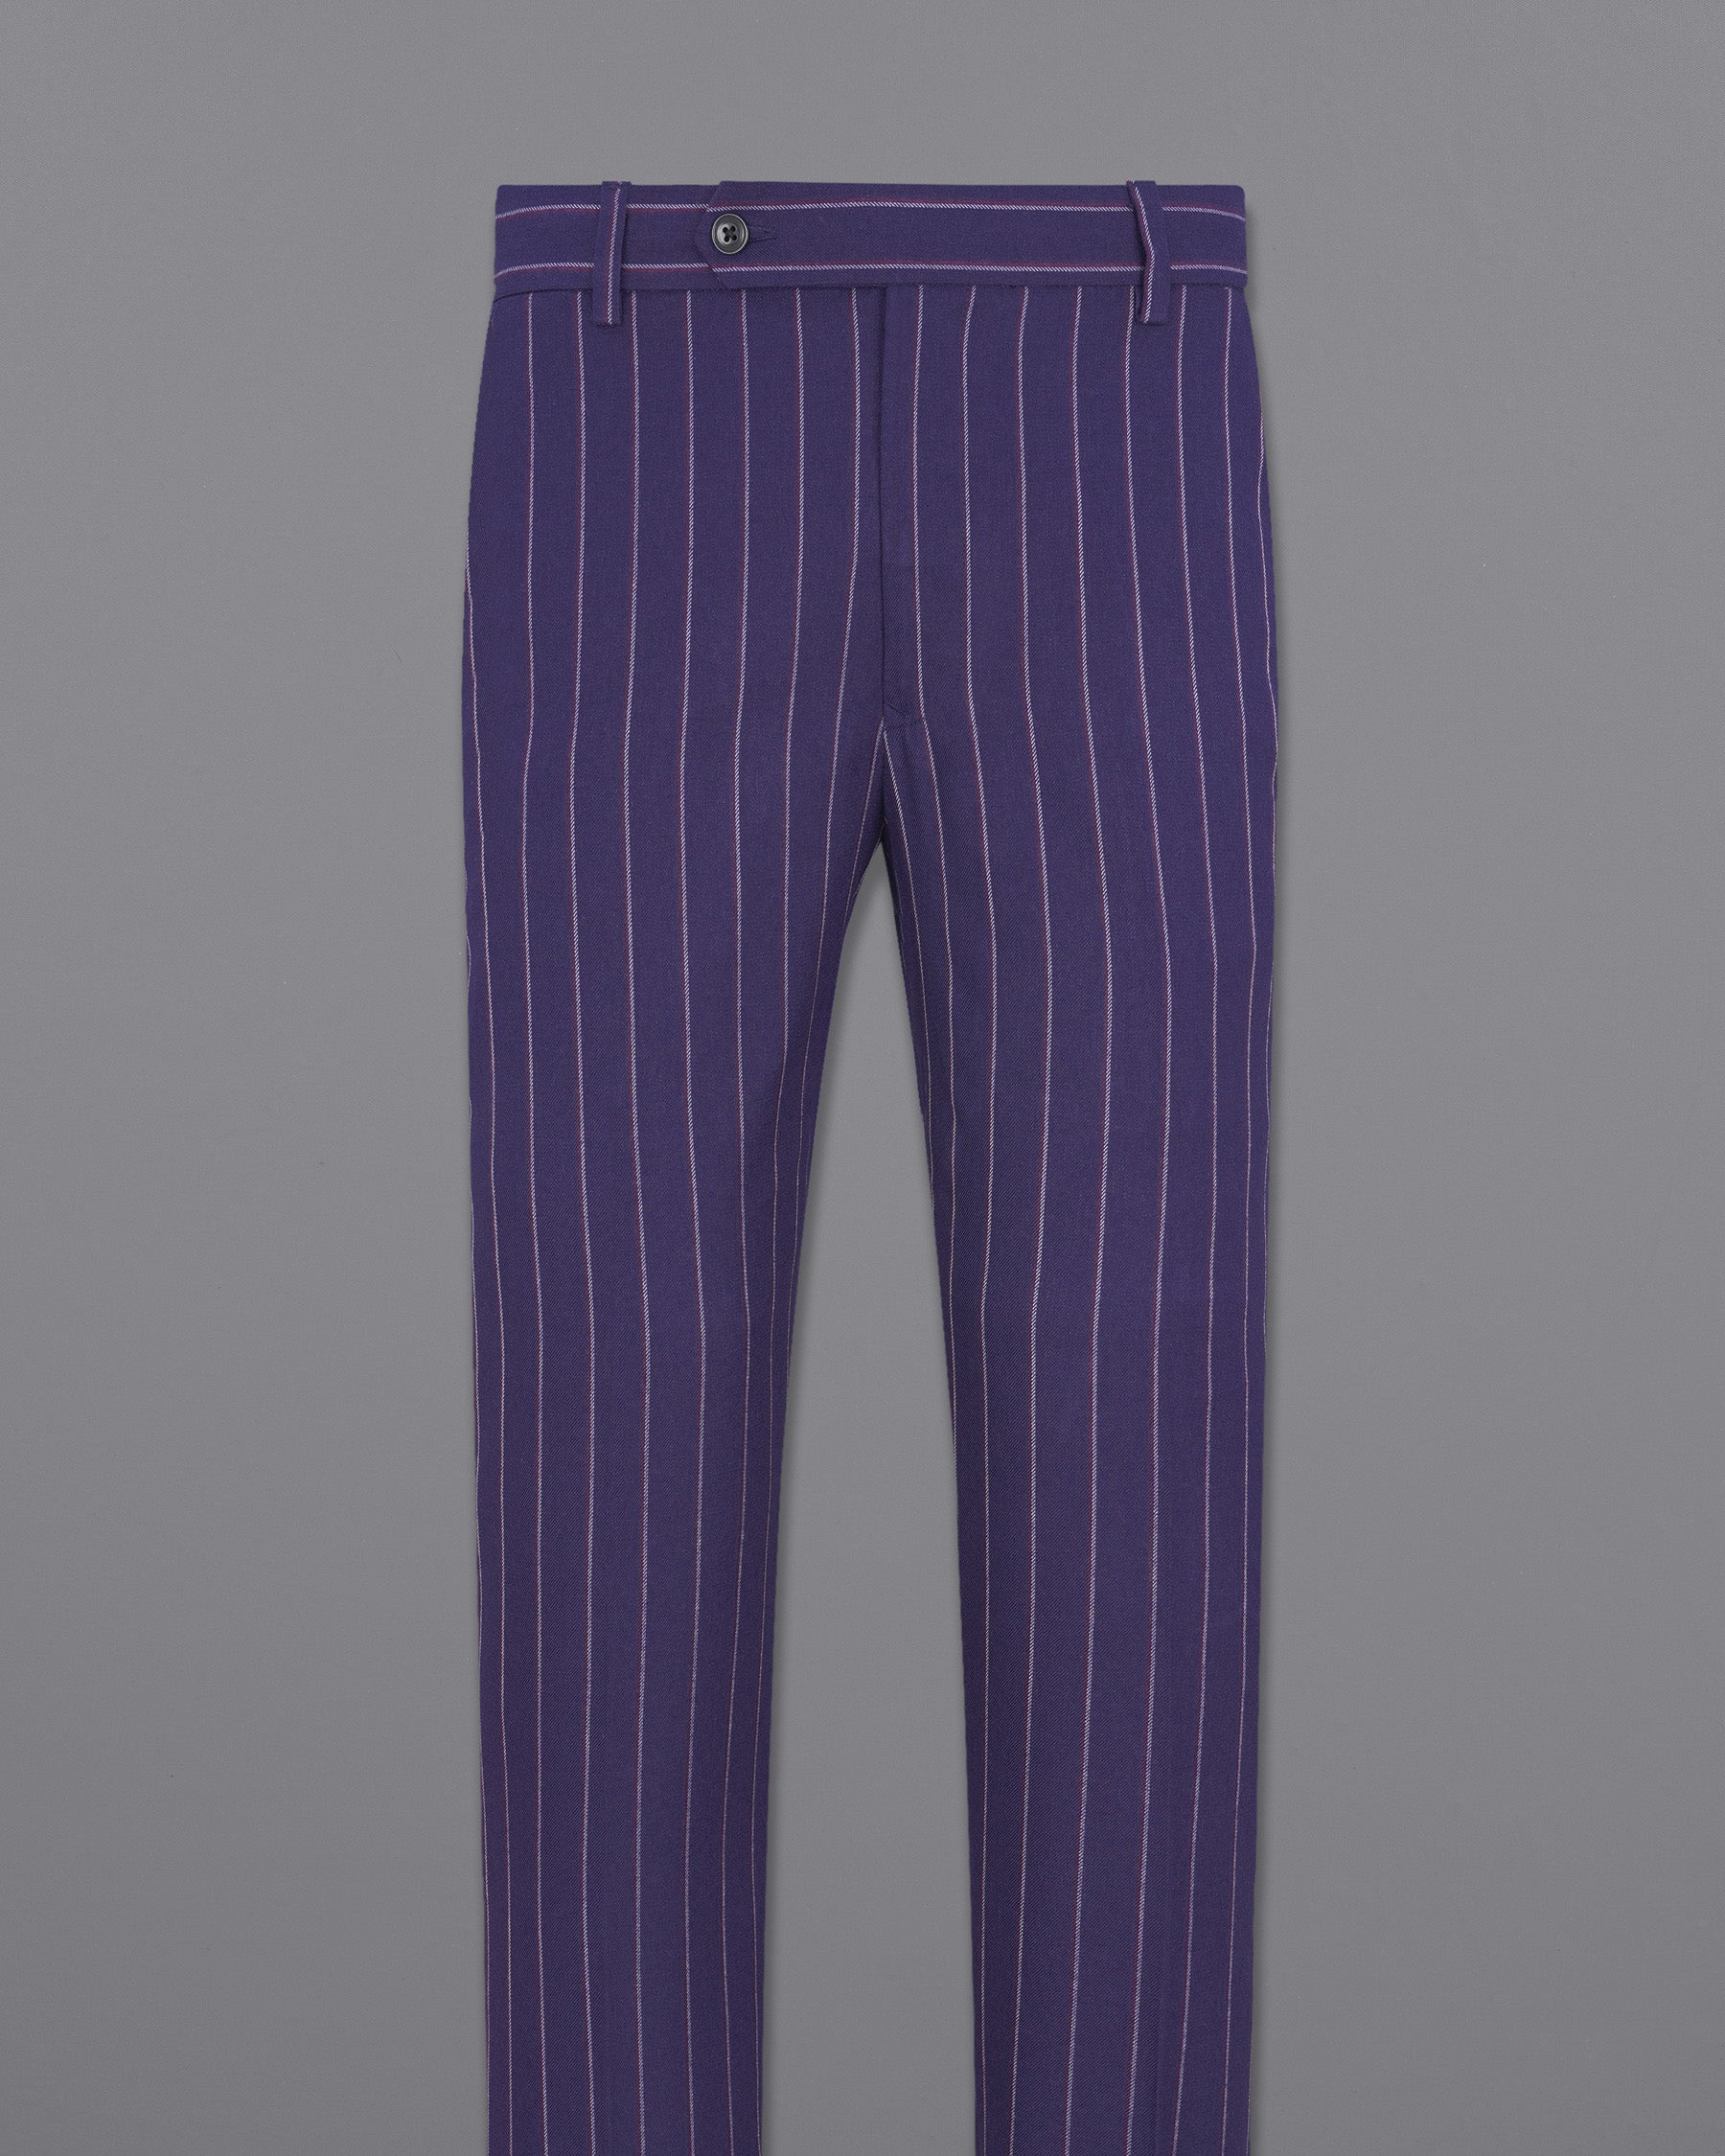 Cherry Pie Striped Woolrich Pant